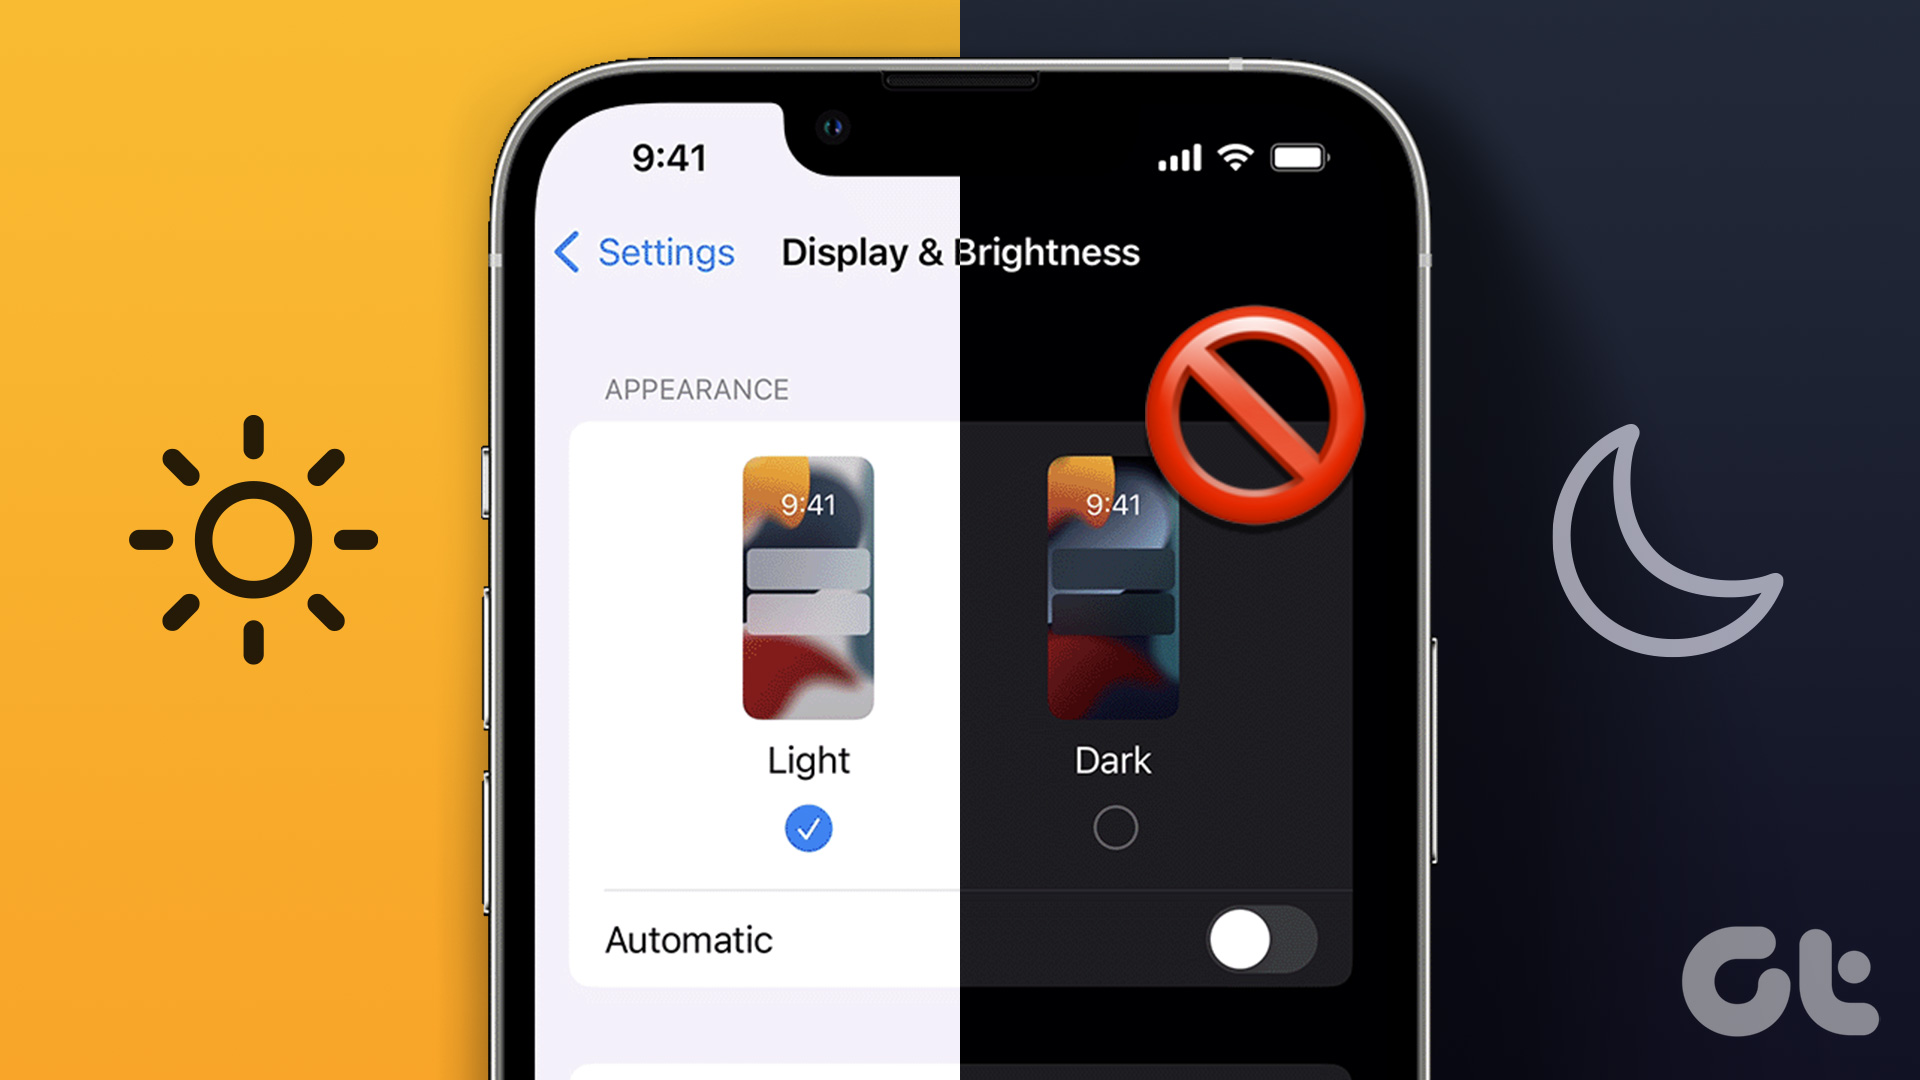 How to Turn off Dark Mode on iPhone